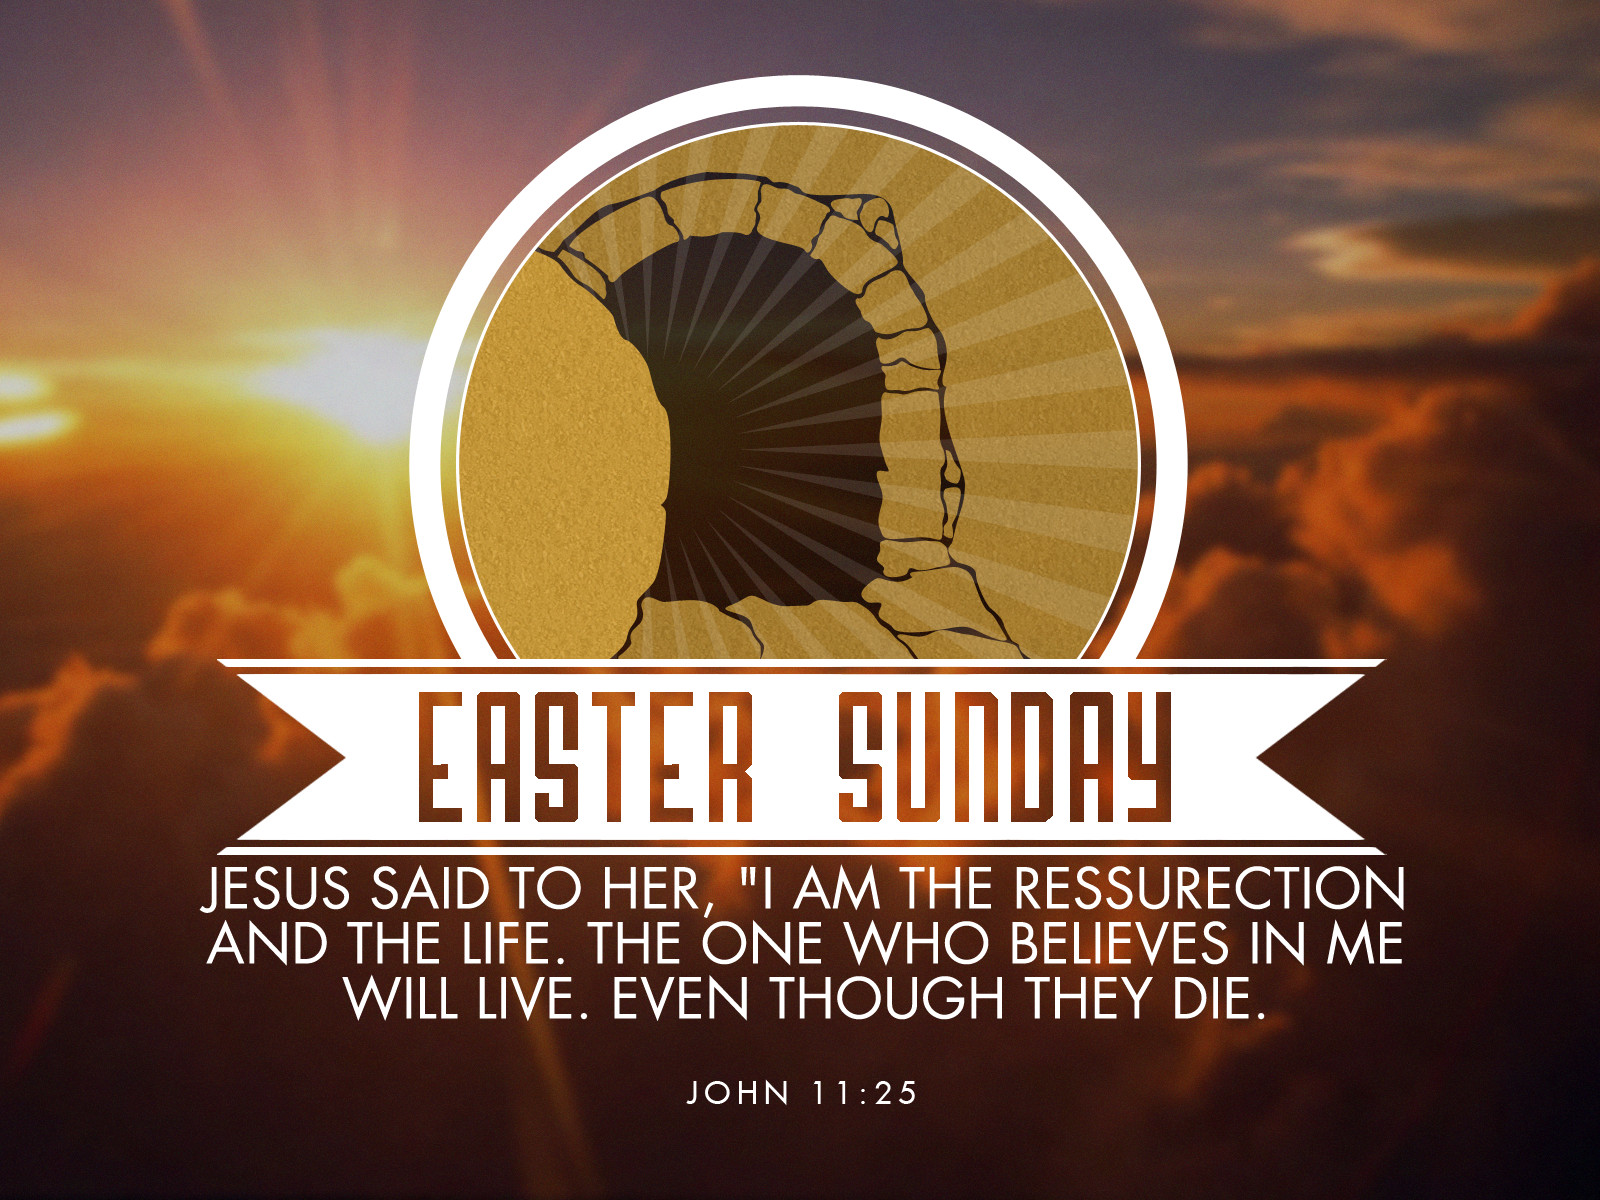 Easter Resurrection Quotes
 Quotes about Easter and the resurrection 30 quotes